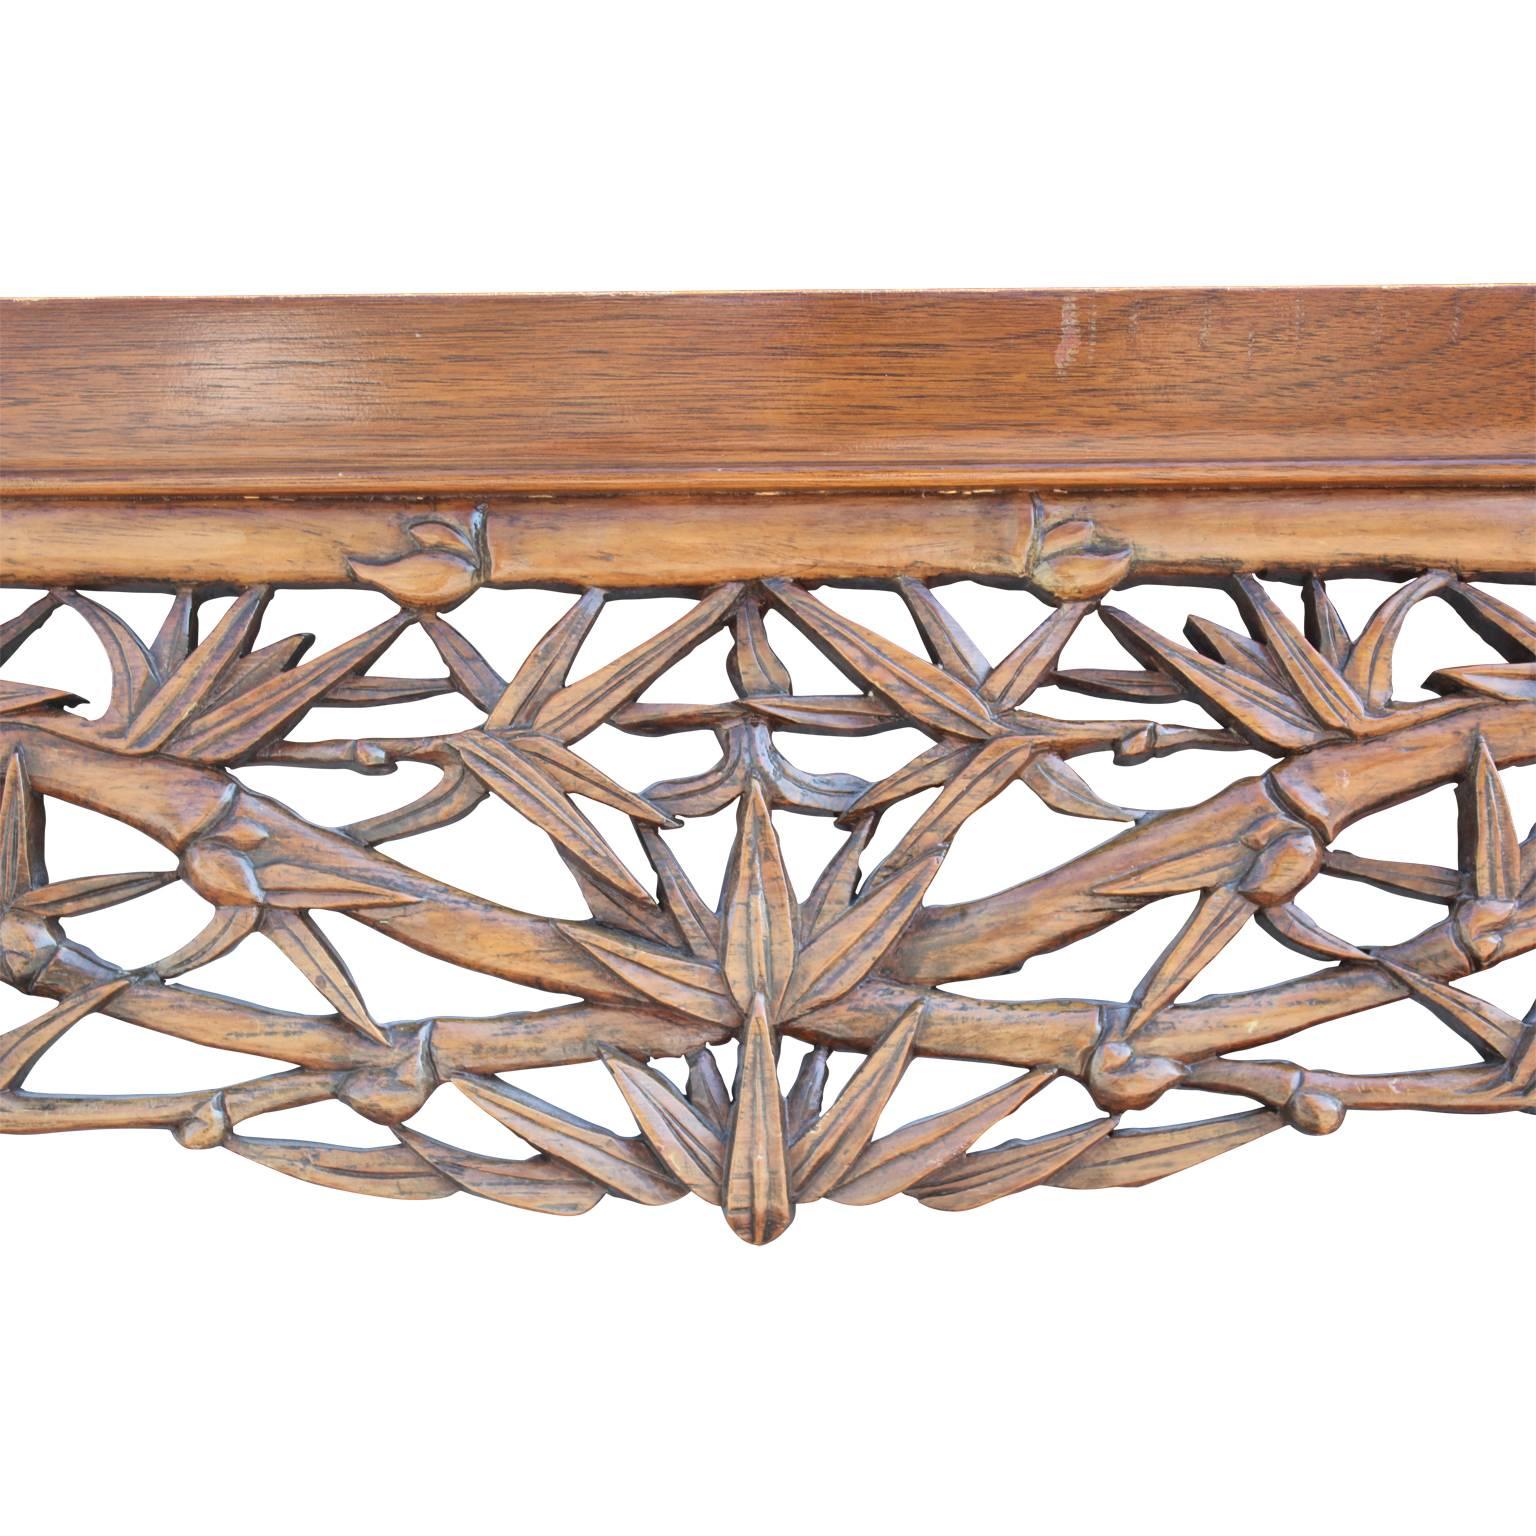 Mid-20th Century Modern Teak Console Table with Hand-Carved Asian Motifs & Horse Hoof Feet